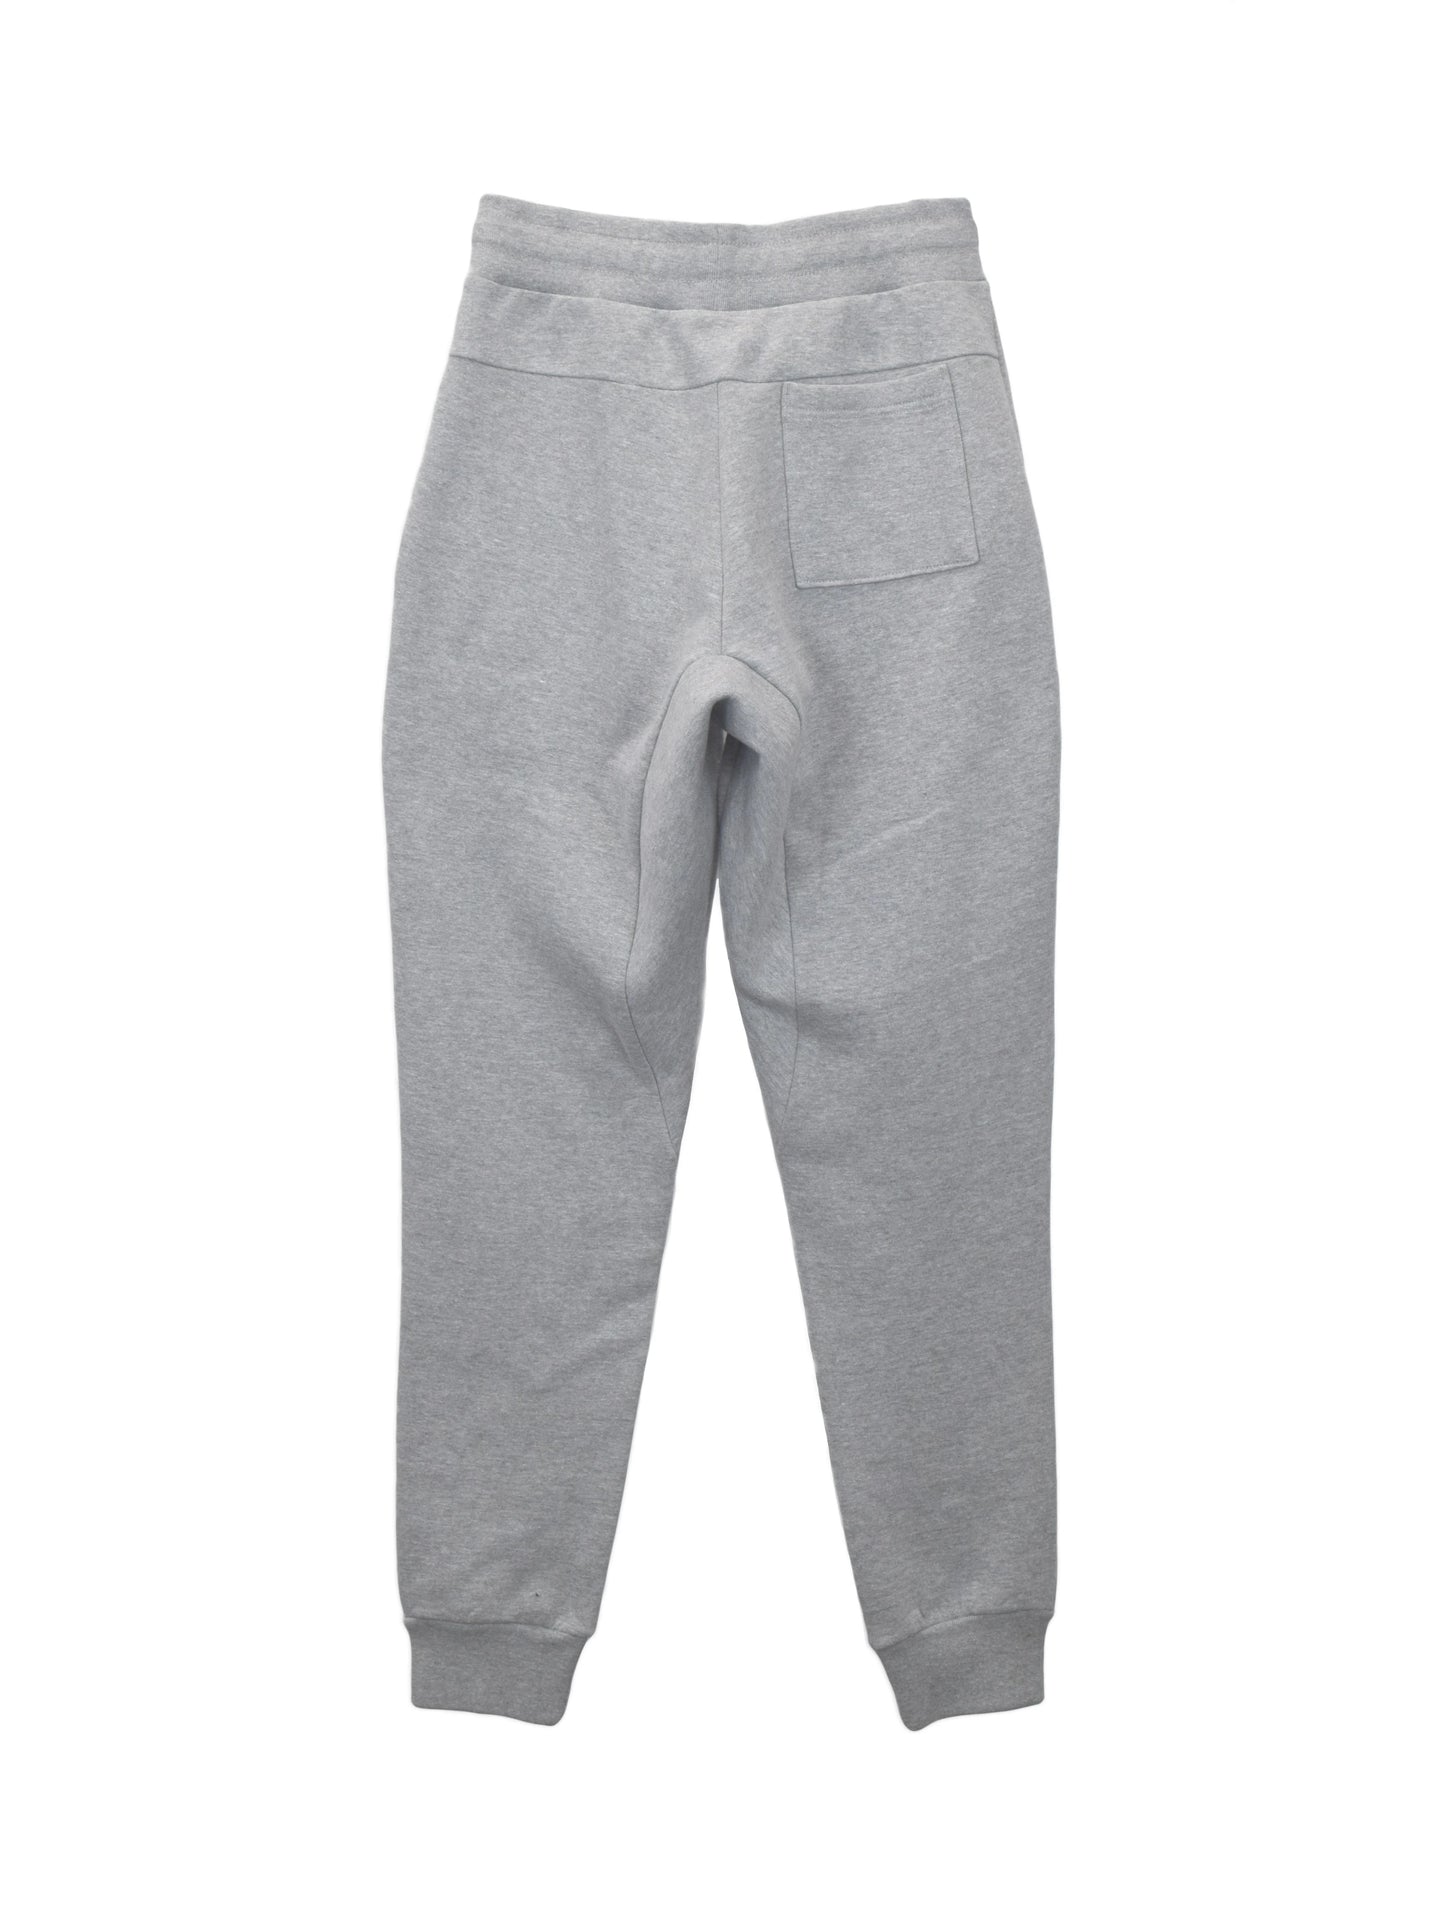 Back of Grey Jogger with two side pockets and single back pocket. Fitted Ankle cuffs